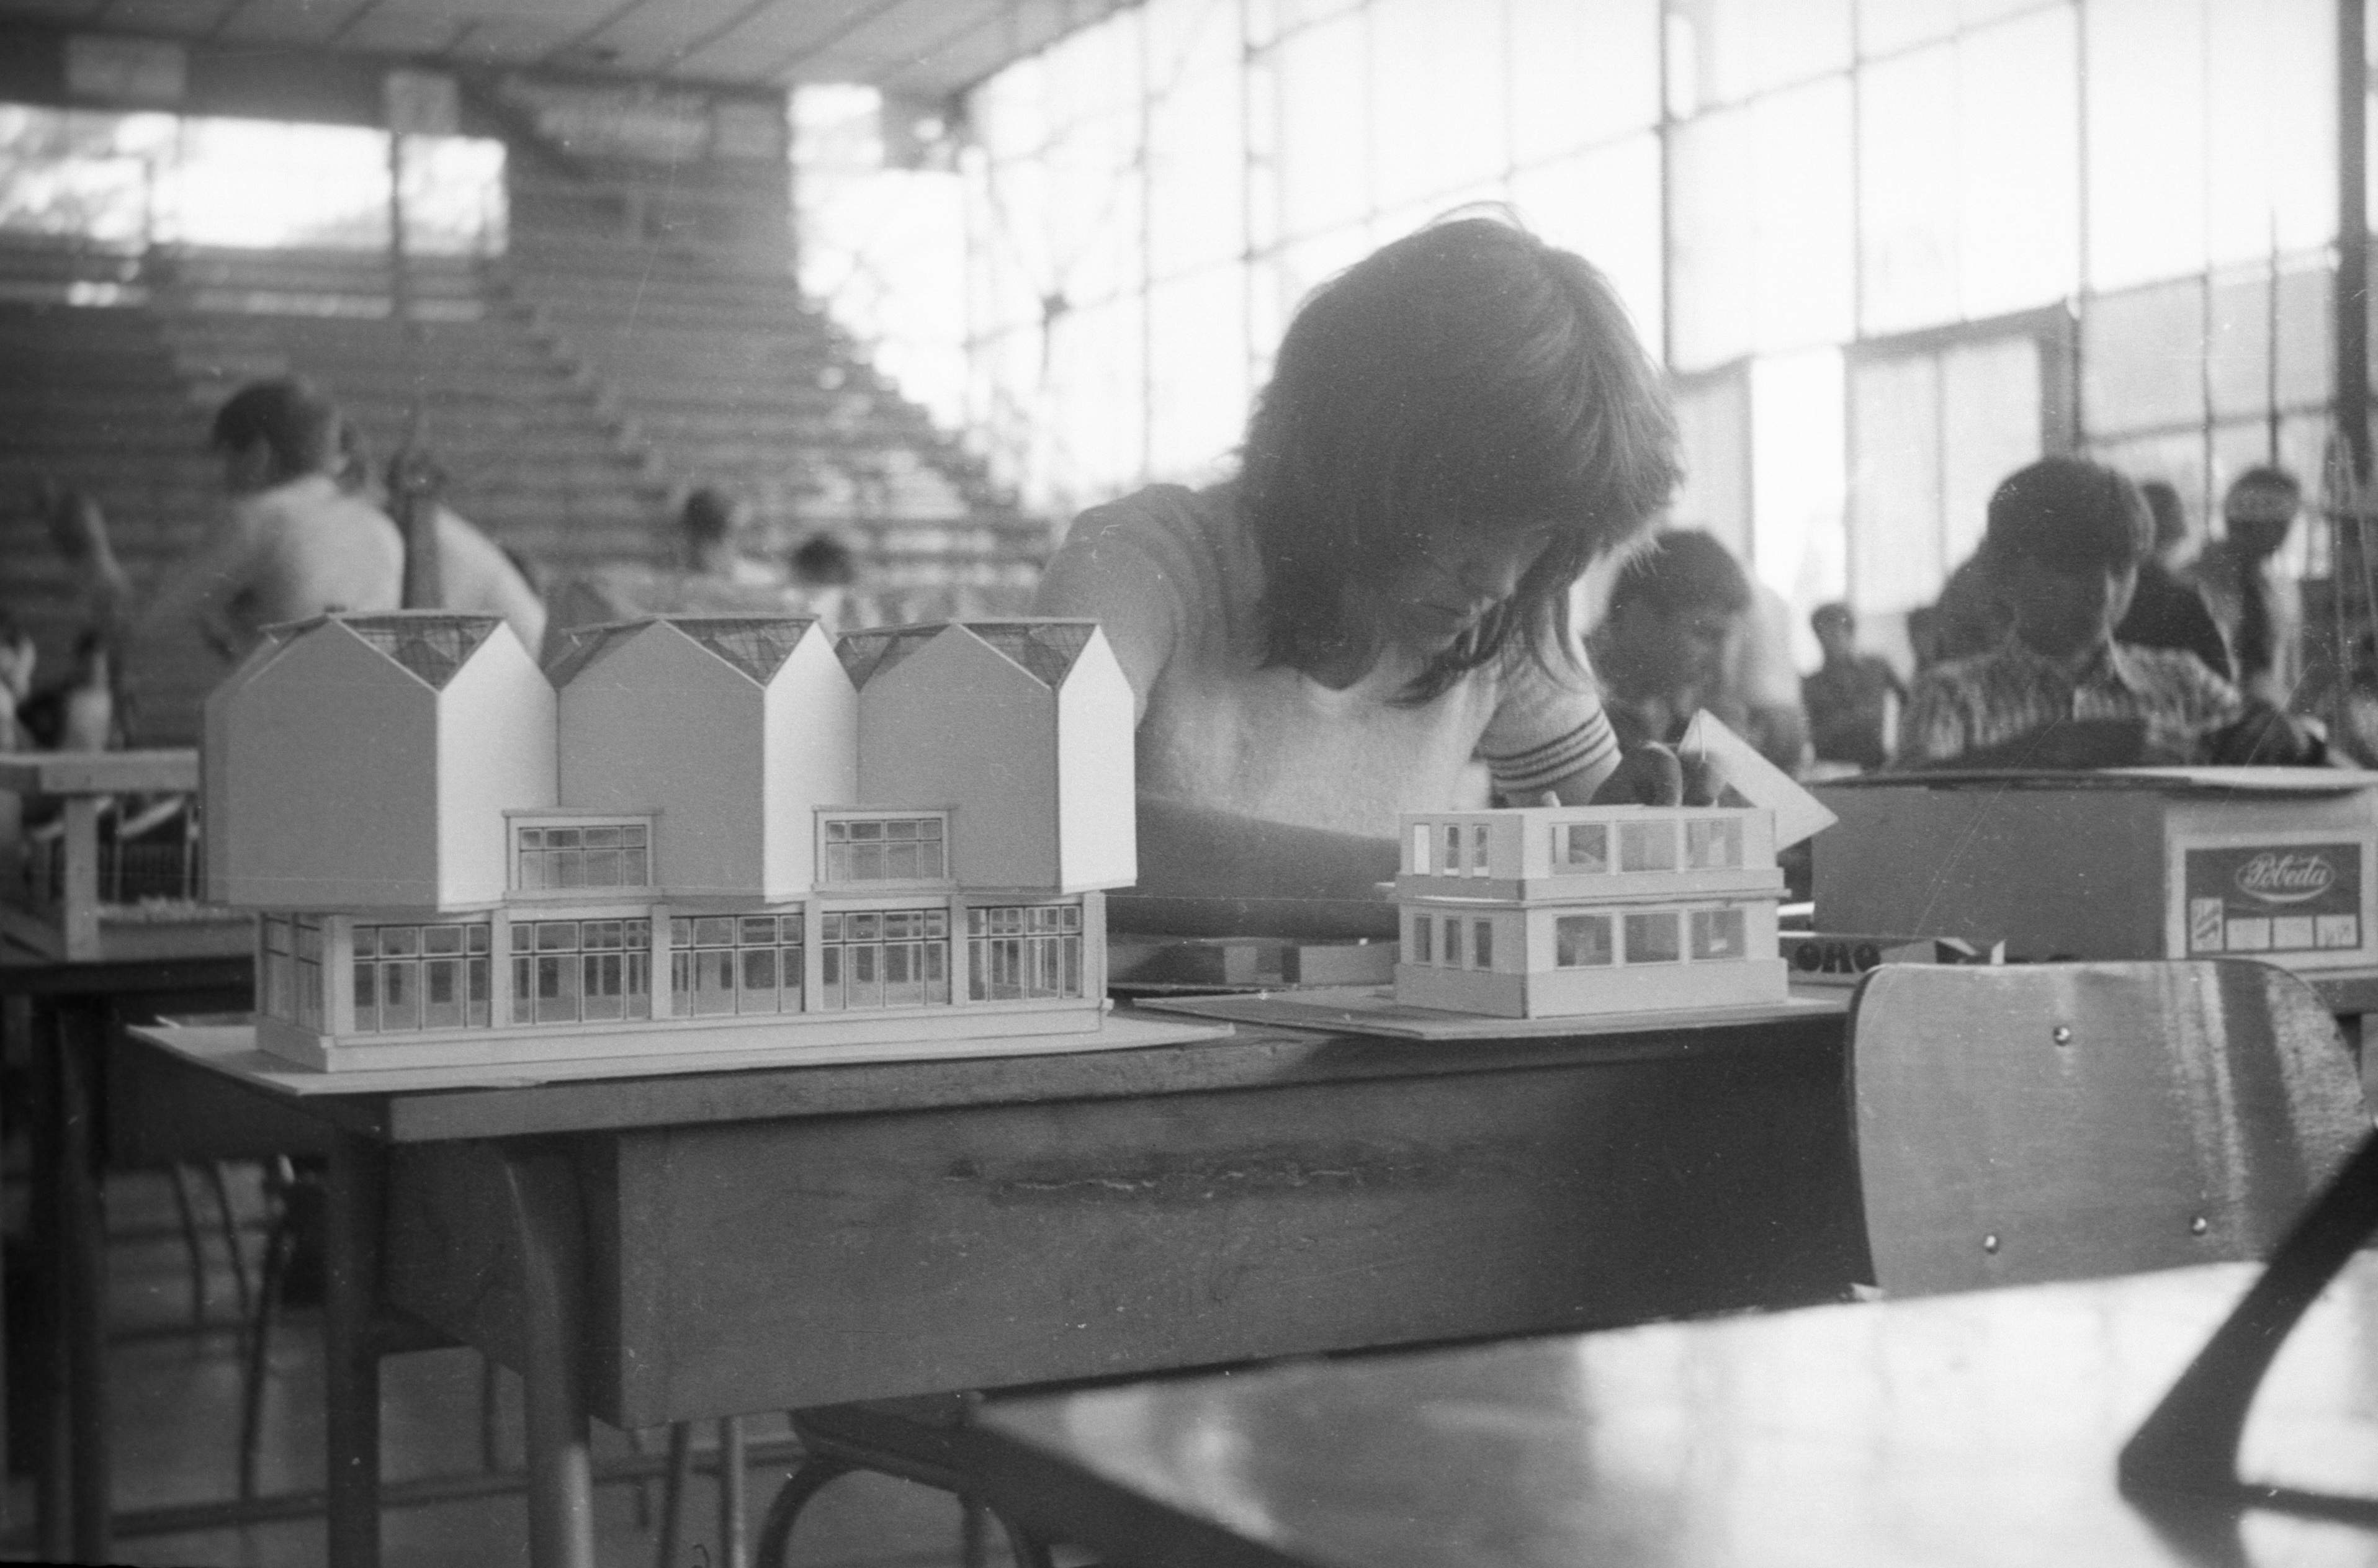 Don't know who this is, but her model of the Museum of modern art is perfect. The chairs and desks are probably from the nearest school.